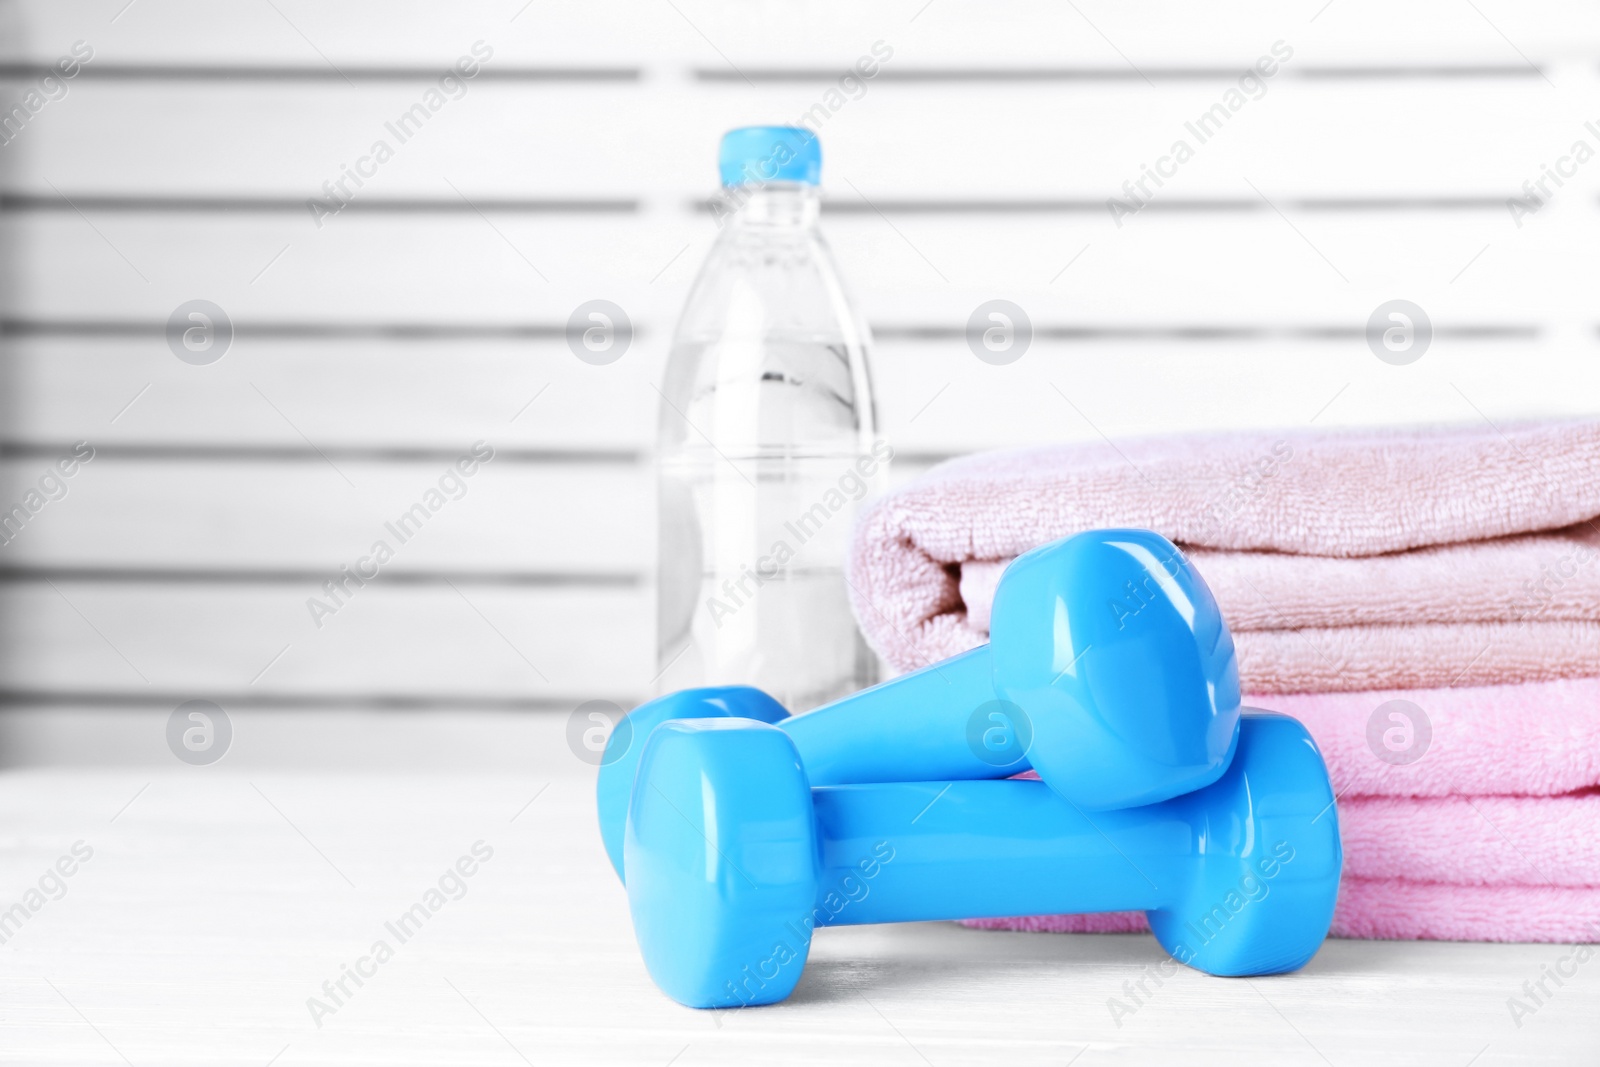 Photo of Vinyl dumbbells, bottle of water and towels on table, space for text